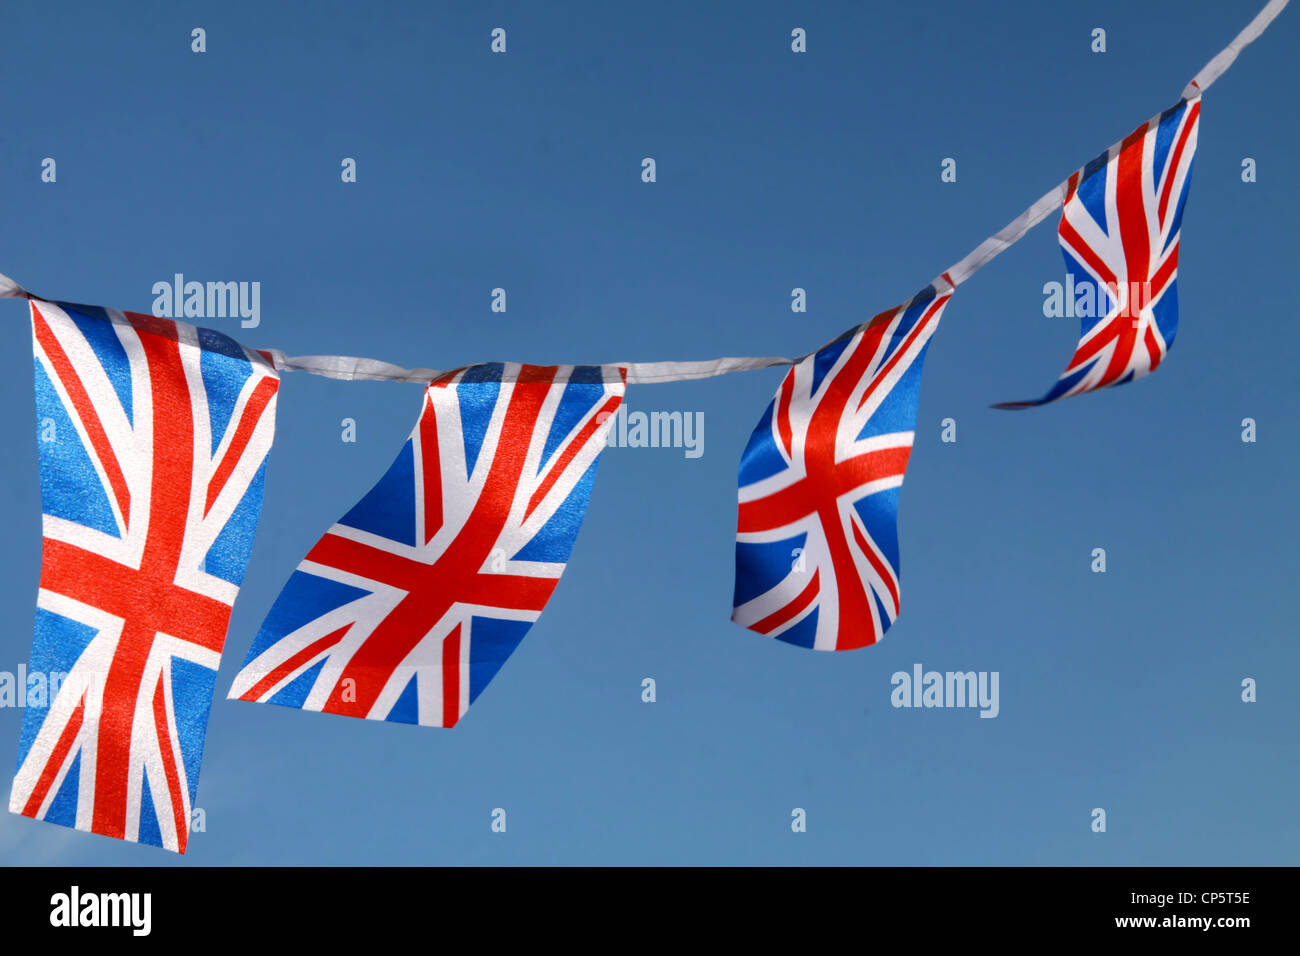 Jubilee United kingdom flags blowing in wind with blue sky in landscape horizontal format Stock Photo